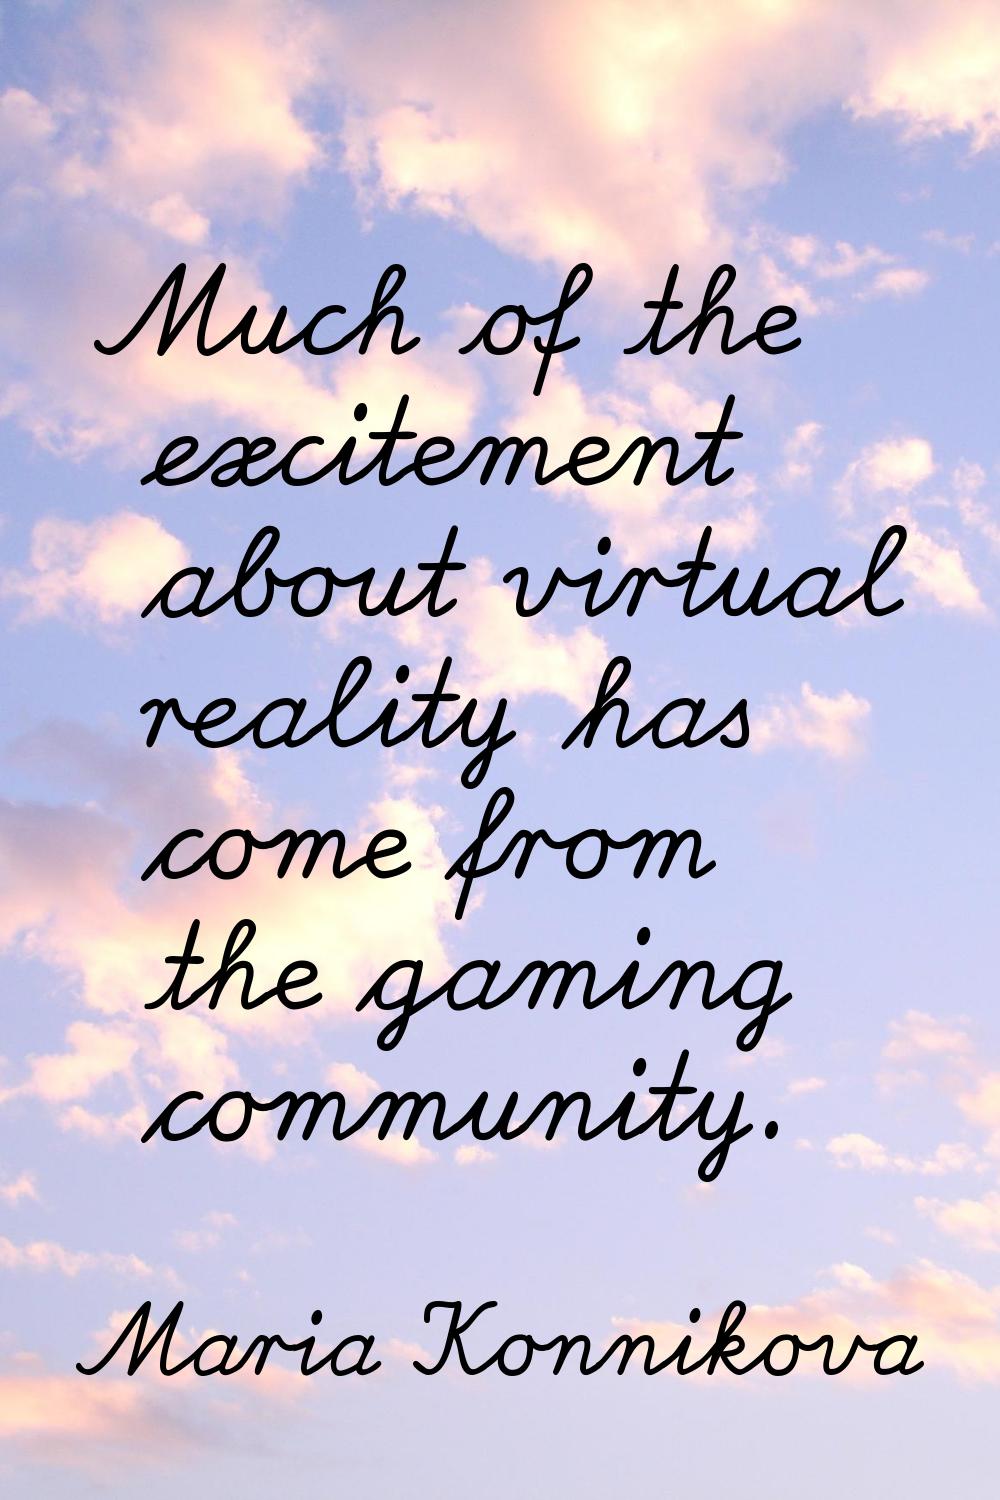 Much of the excitement about virtual reality has come from the gaming community.